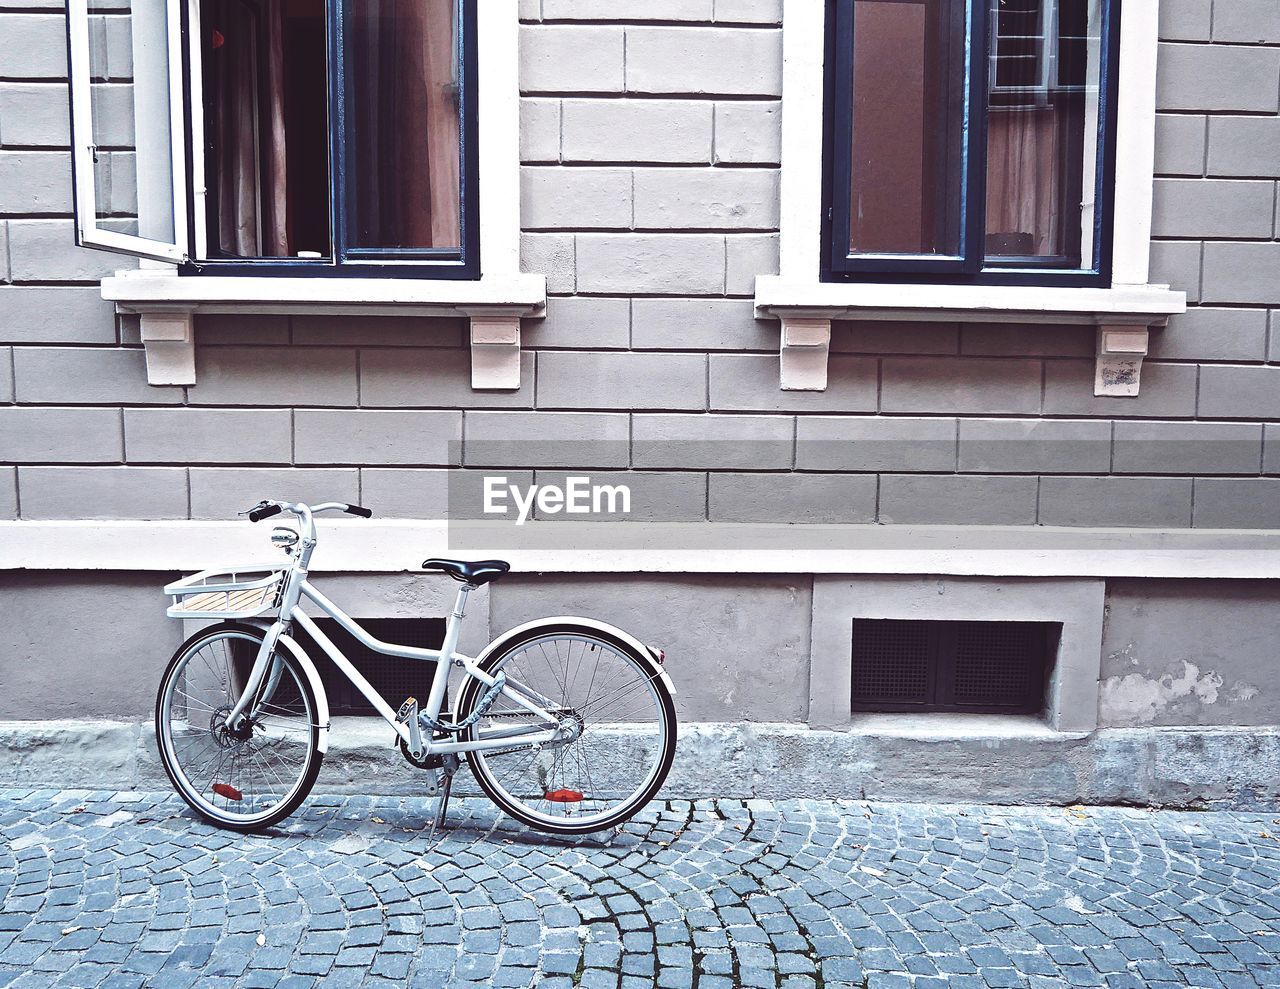 Bicycle parked on street against building